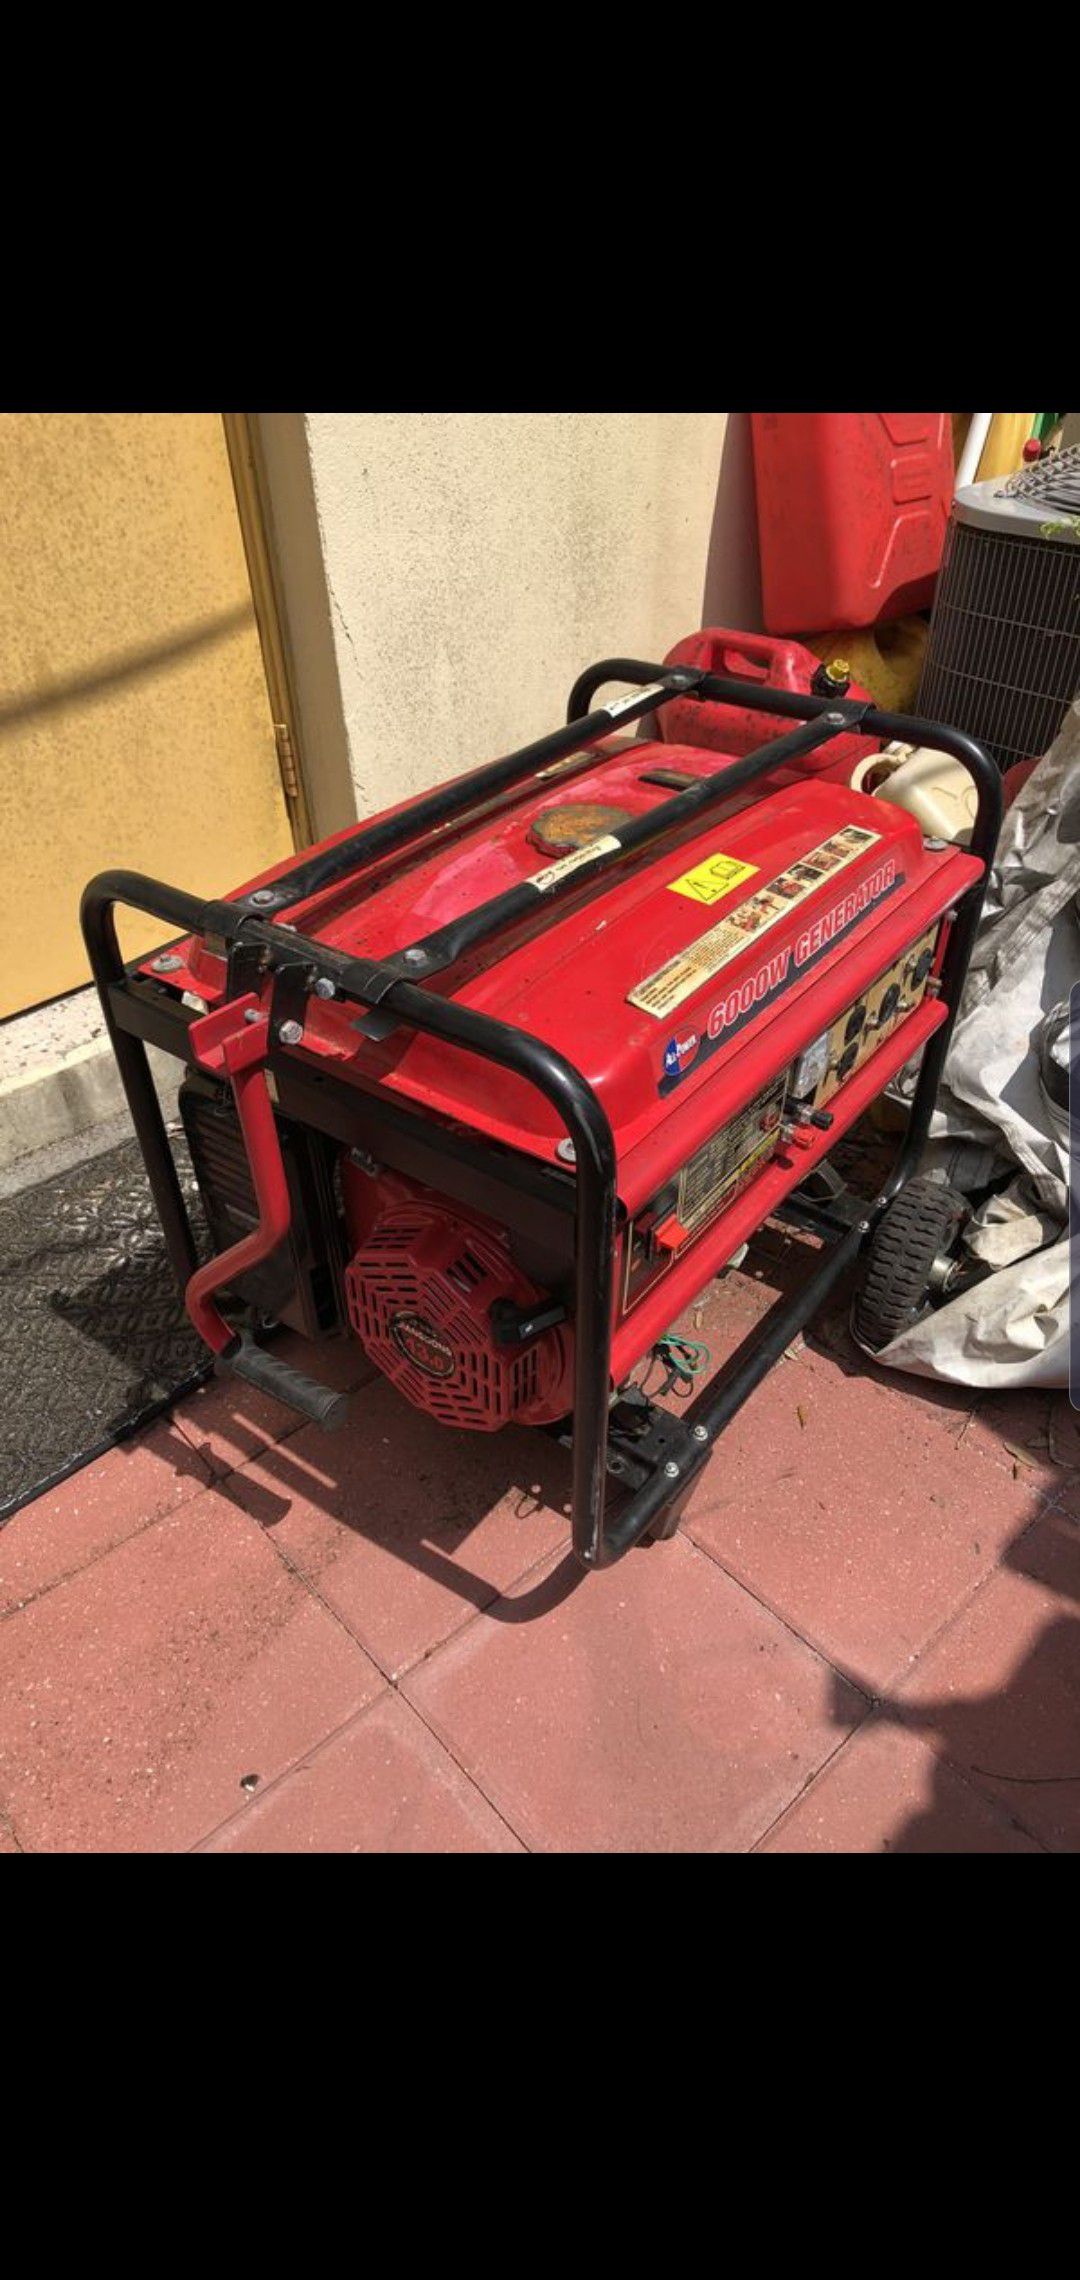 Generator 6000 watts with gas cans and extension cords